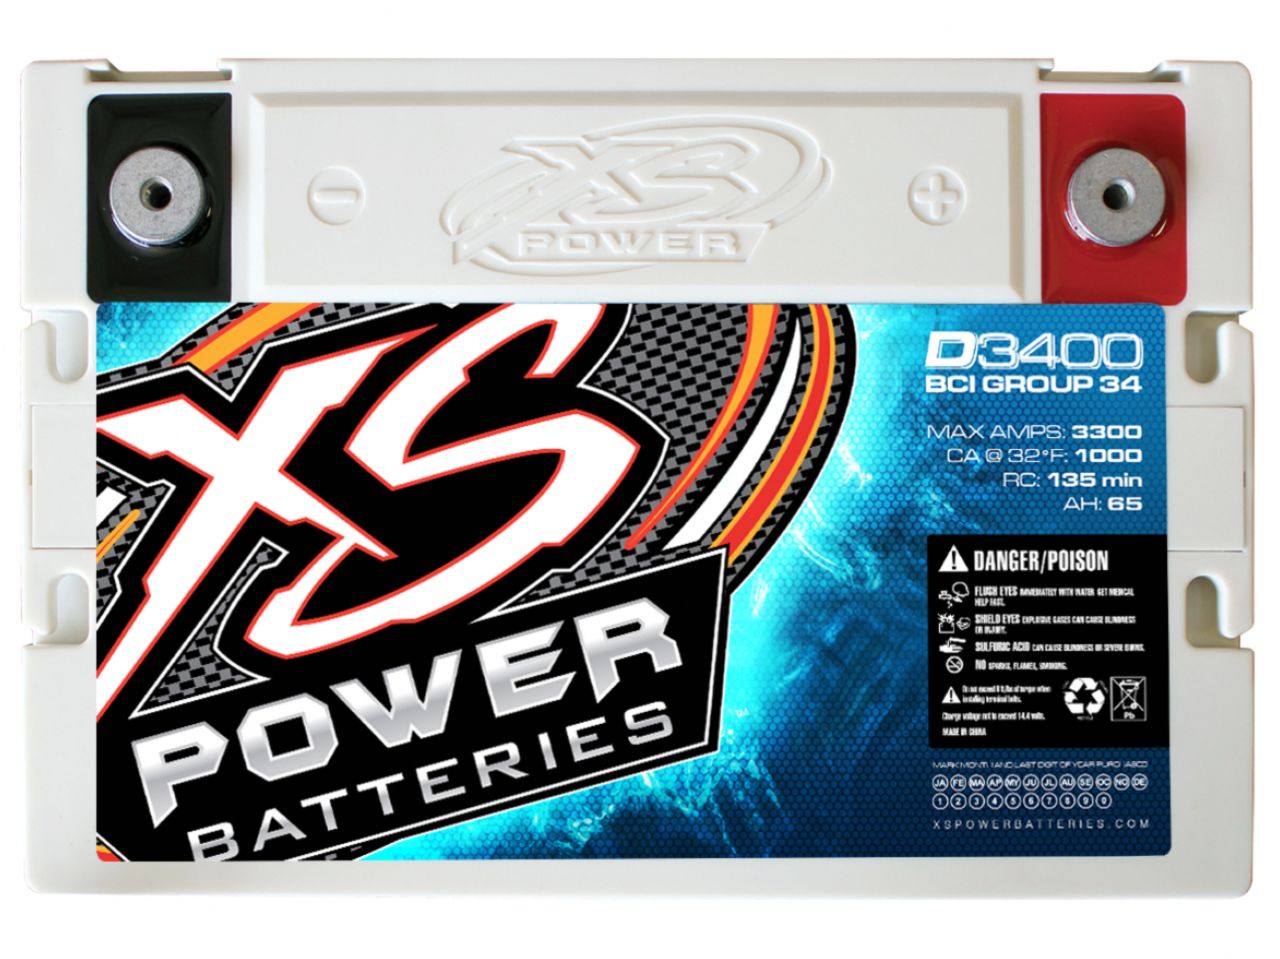 XS Power 12V BCI Group 34 AGM Battery, Max Amps 3300A, CA: 1000 Ah: 65